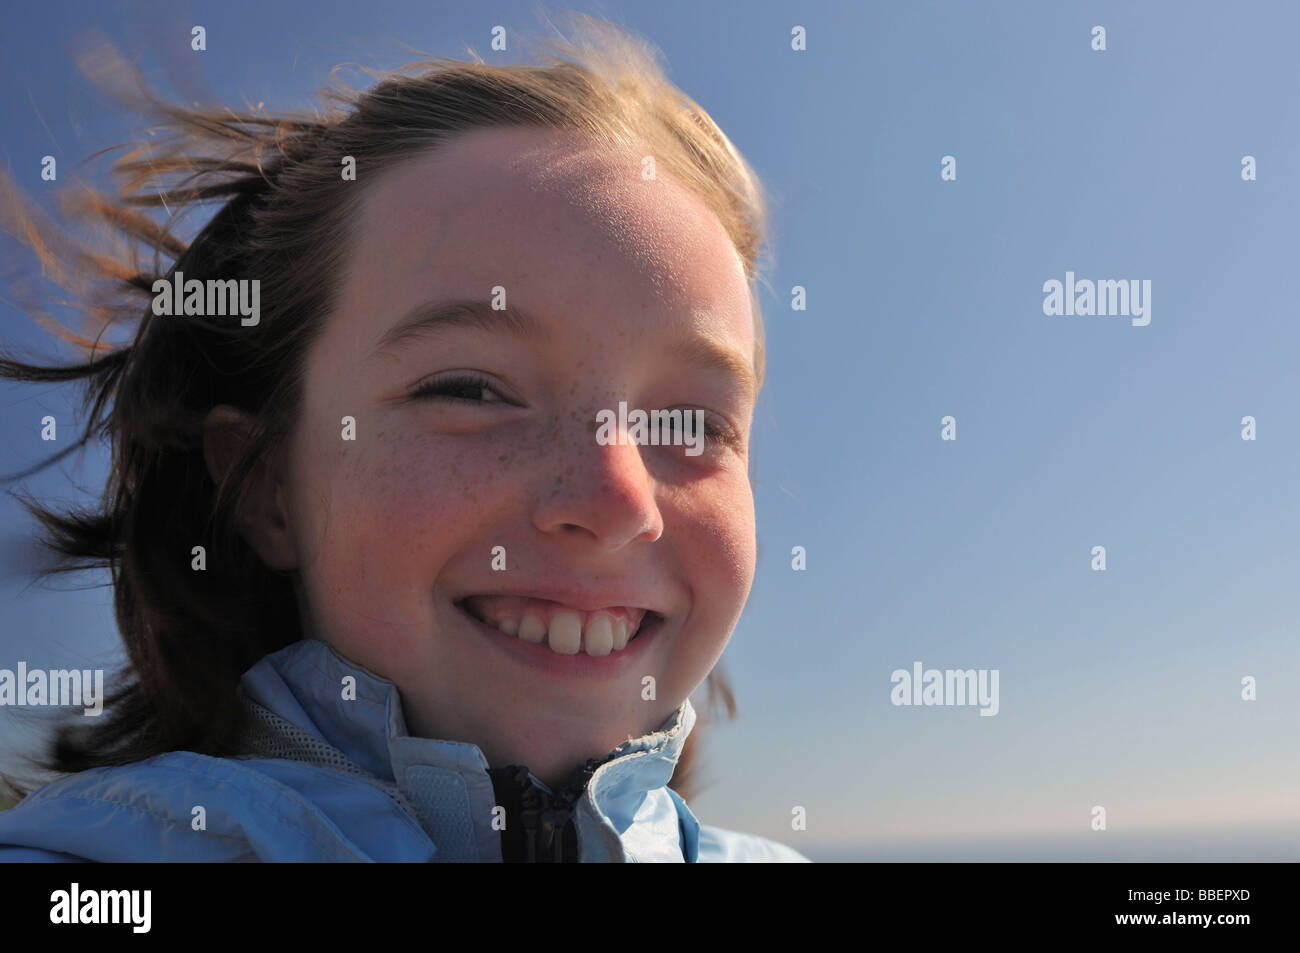 Portrait of a girl smiling with wind blowing in her hair Stock Photo